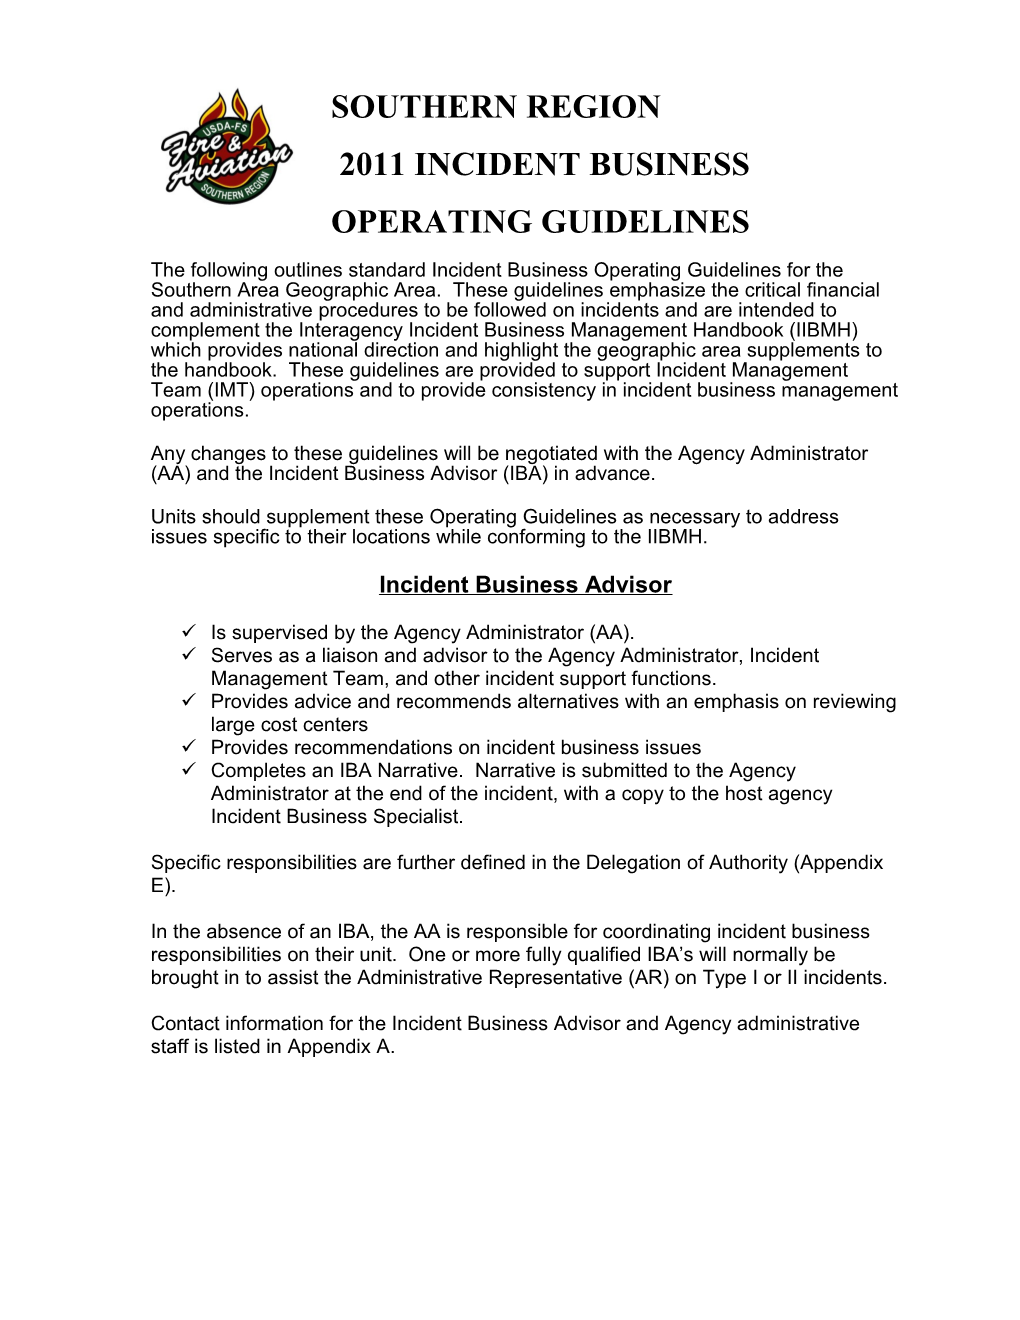 The Following Outlines Standard Incident Business Operating Guidelines for the Southern